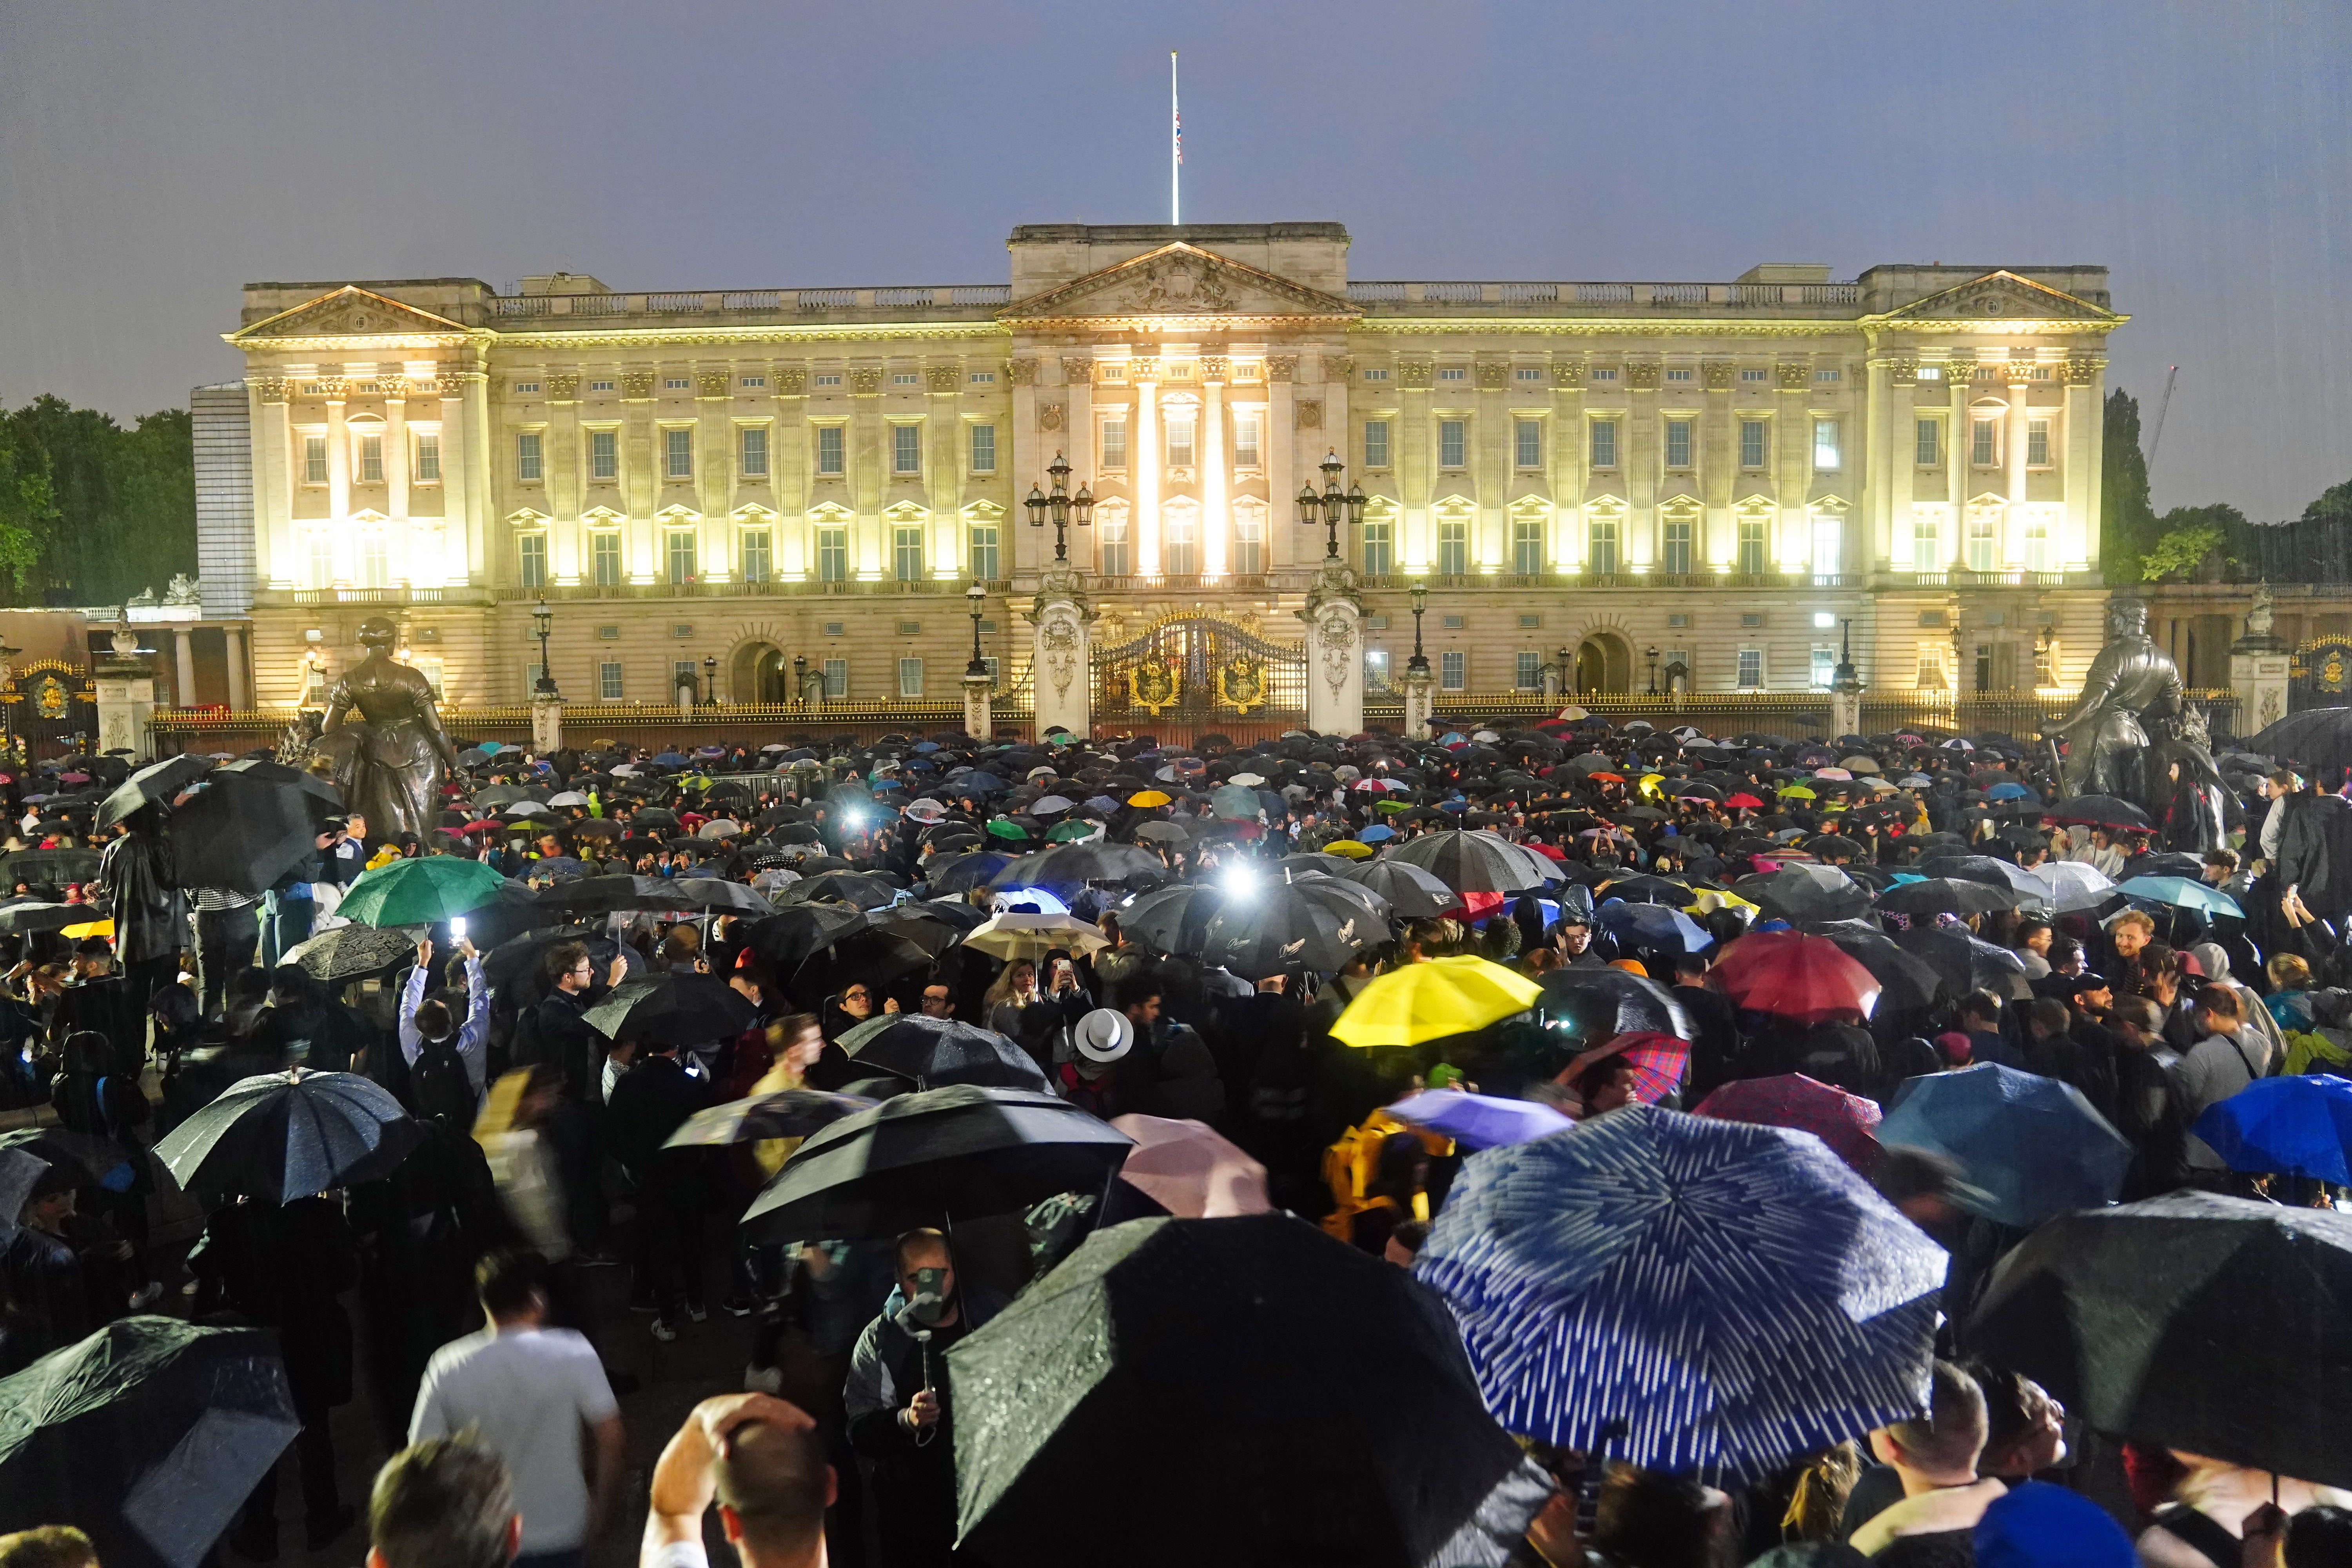 Global media outlets flock to Buckingham Palace to report on news of Queen’s death (Victoria Jones/PA)